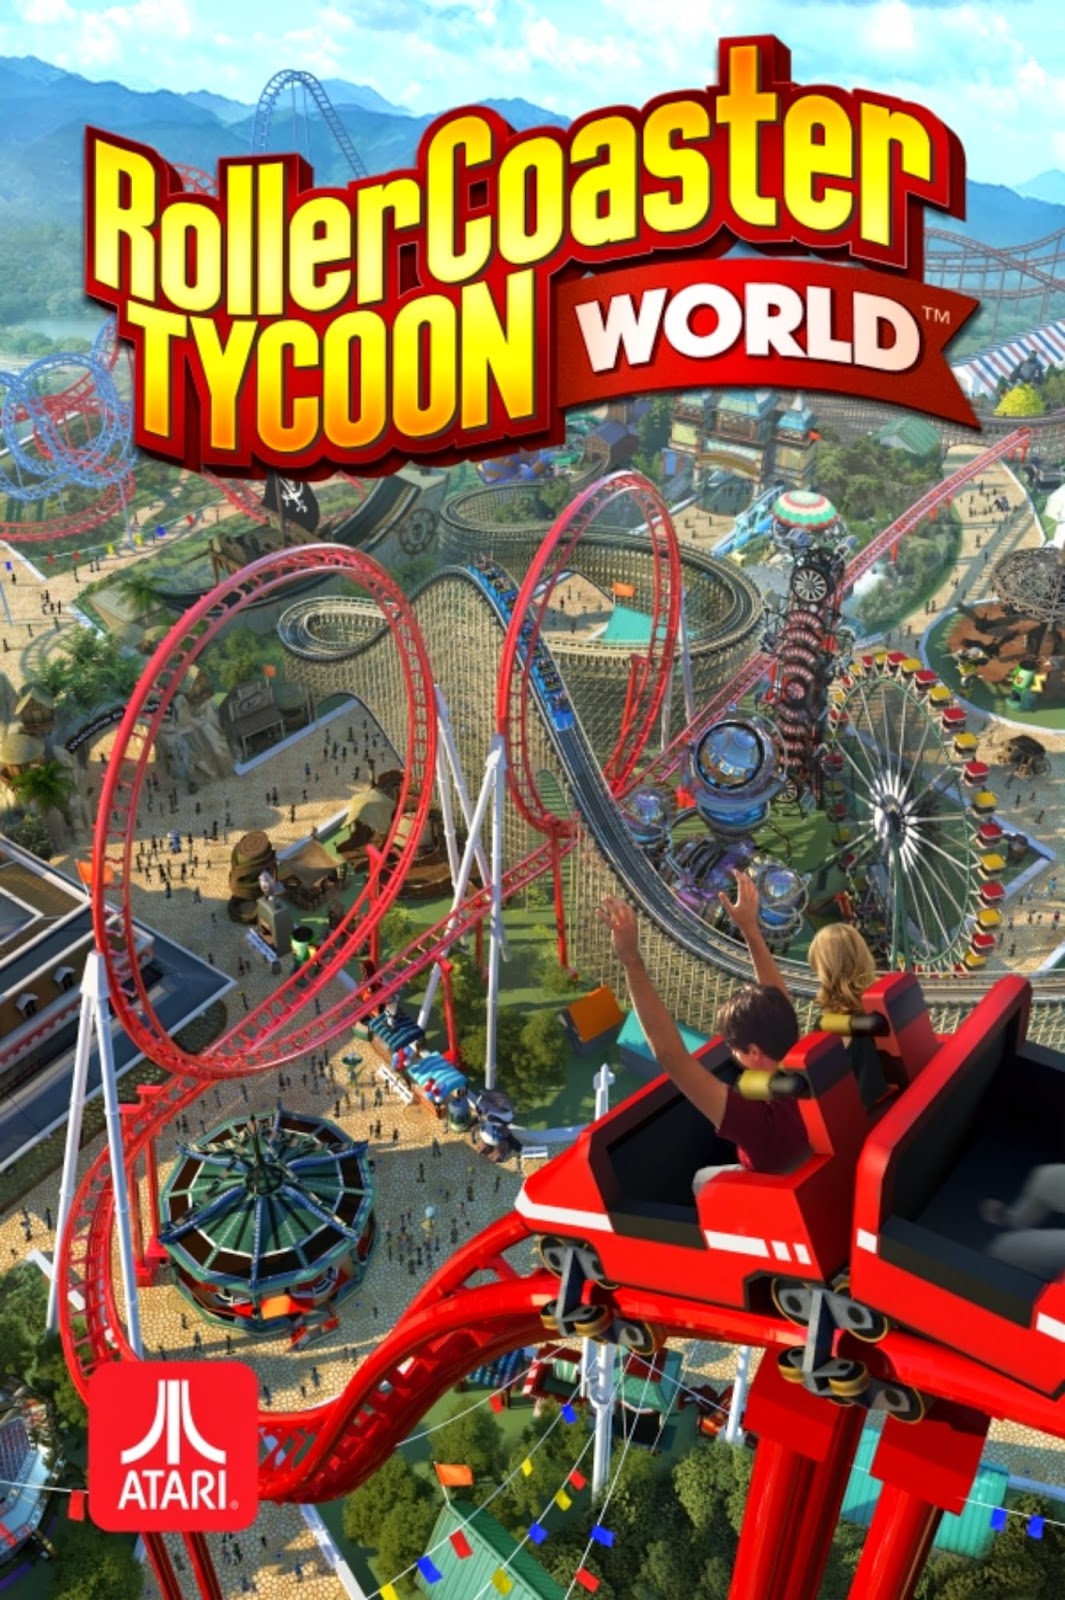 New RollerCoaster Tycoon revealed, coming to mobiles and PC - GameSpot